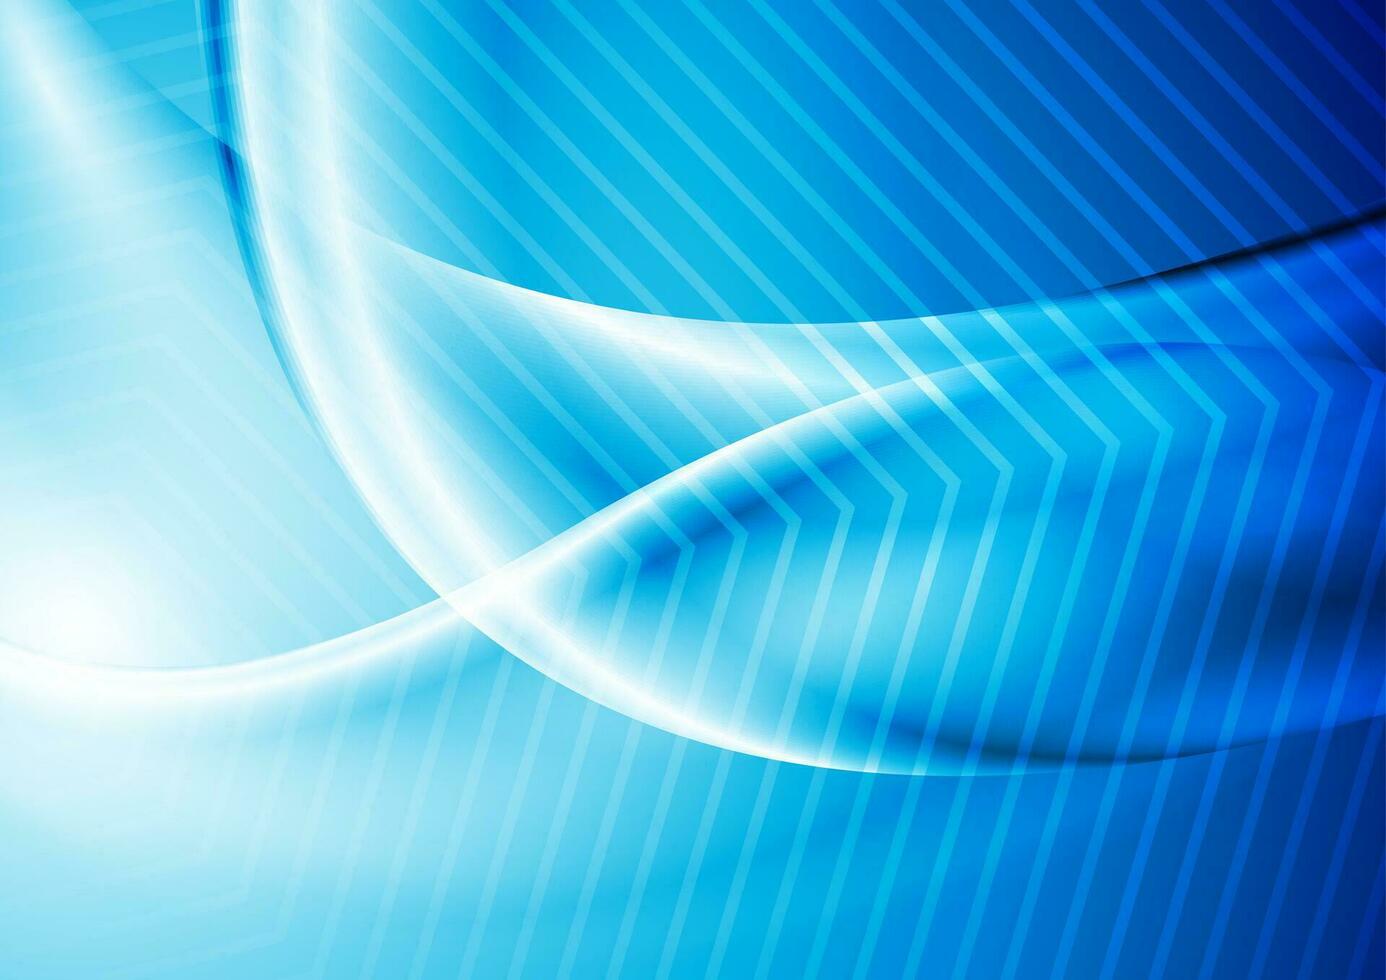 Abstract bright blue geometric wavy background vector